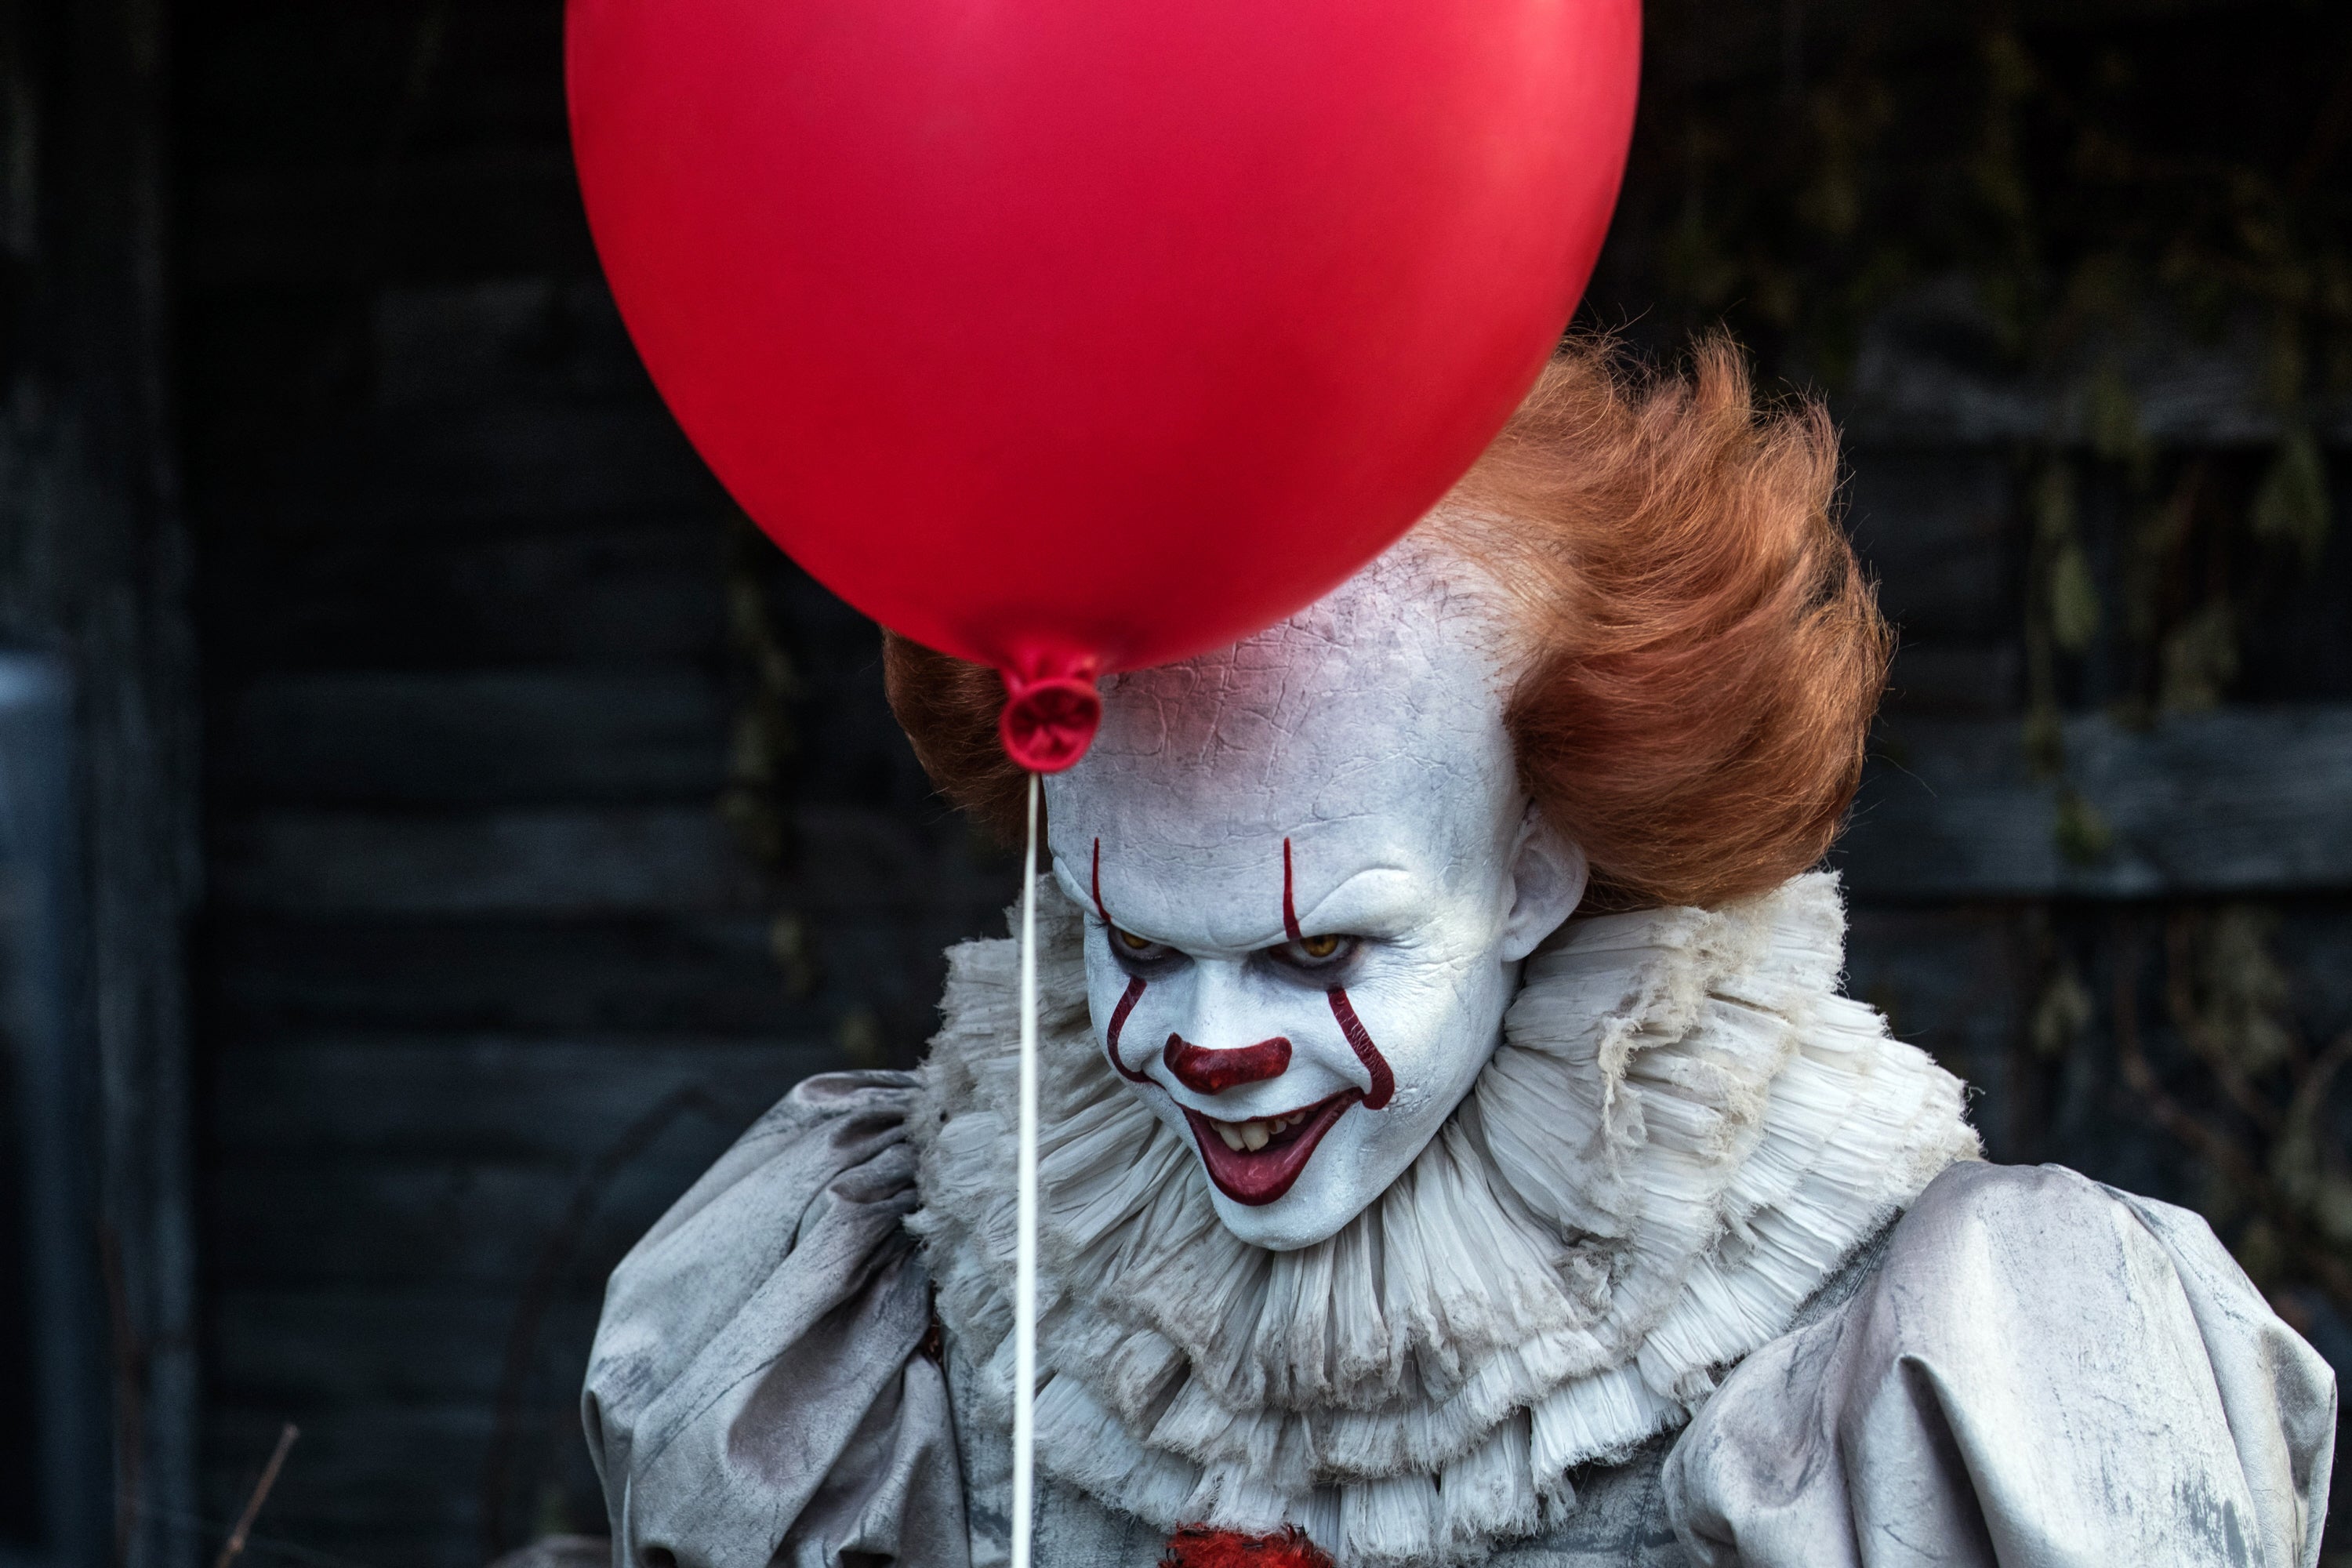 How To Scare Everyone With DIY Pennywise Clown Costume pic